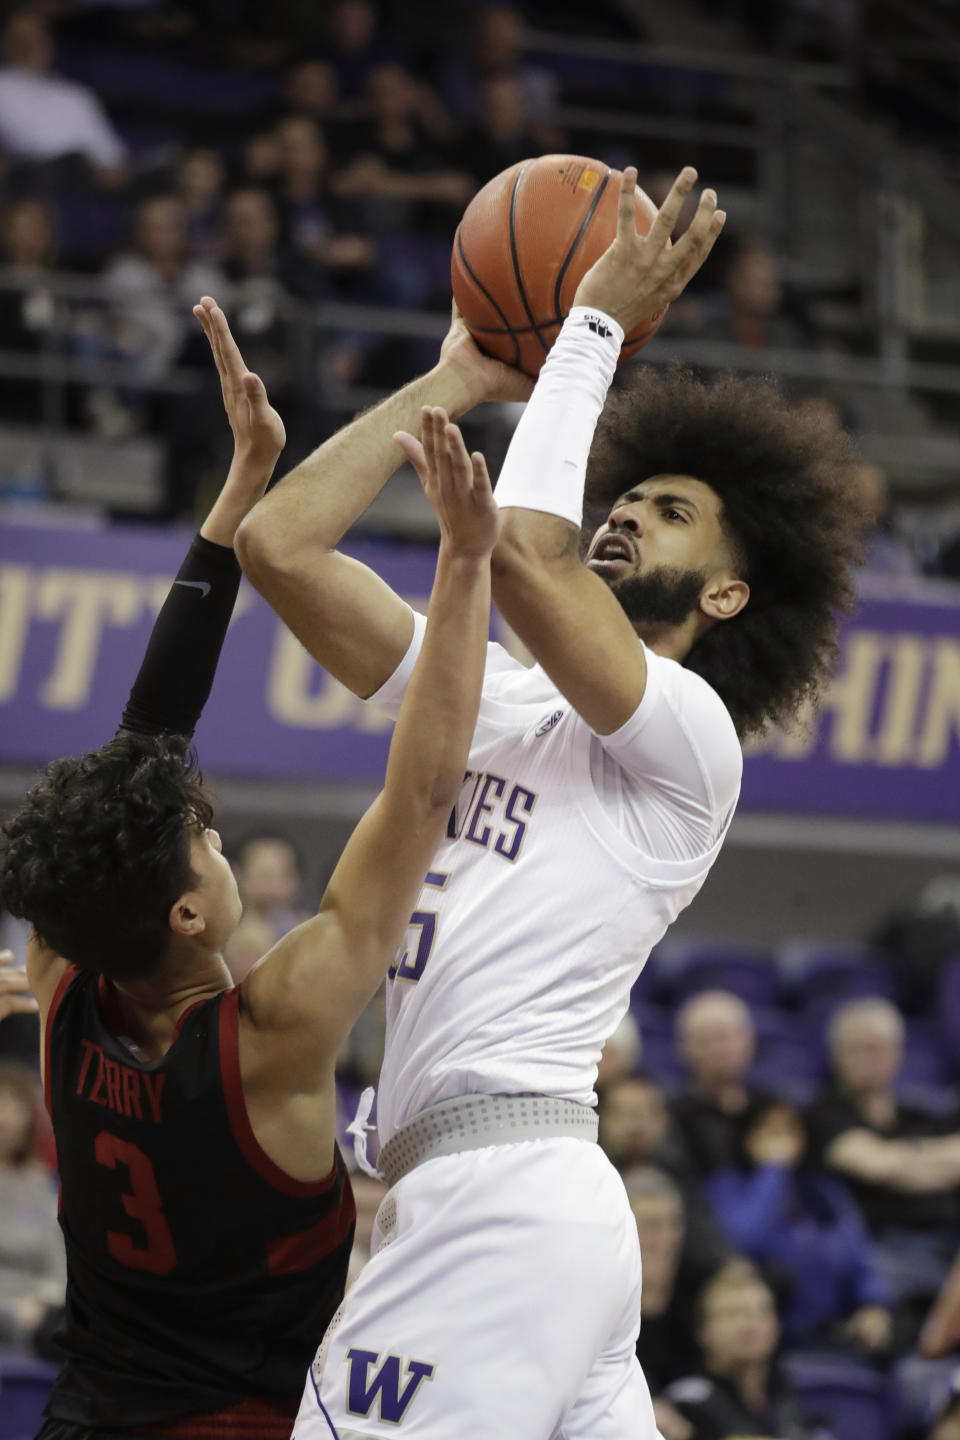 Washington's Marcus Tsohonis shoots over Stanford's Tyrell Terry (3) during the first half of an NCAA college basketball game Thursday, Feb. 20, 2020, in Seattle. (AP Photo/Elaine Thompson)